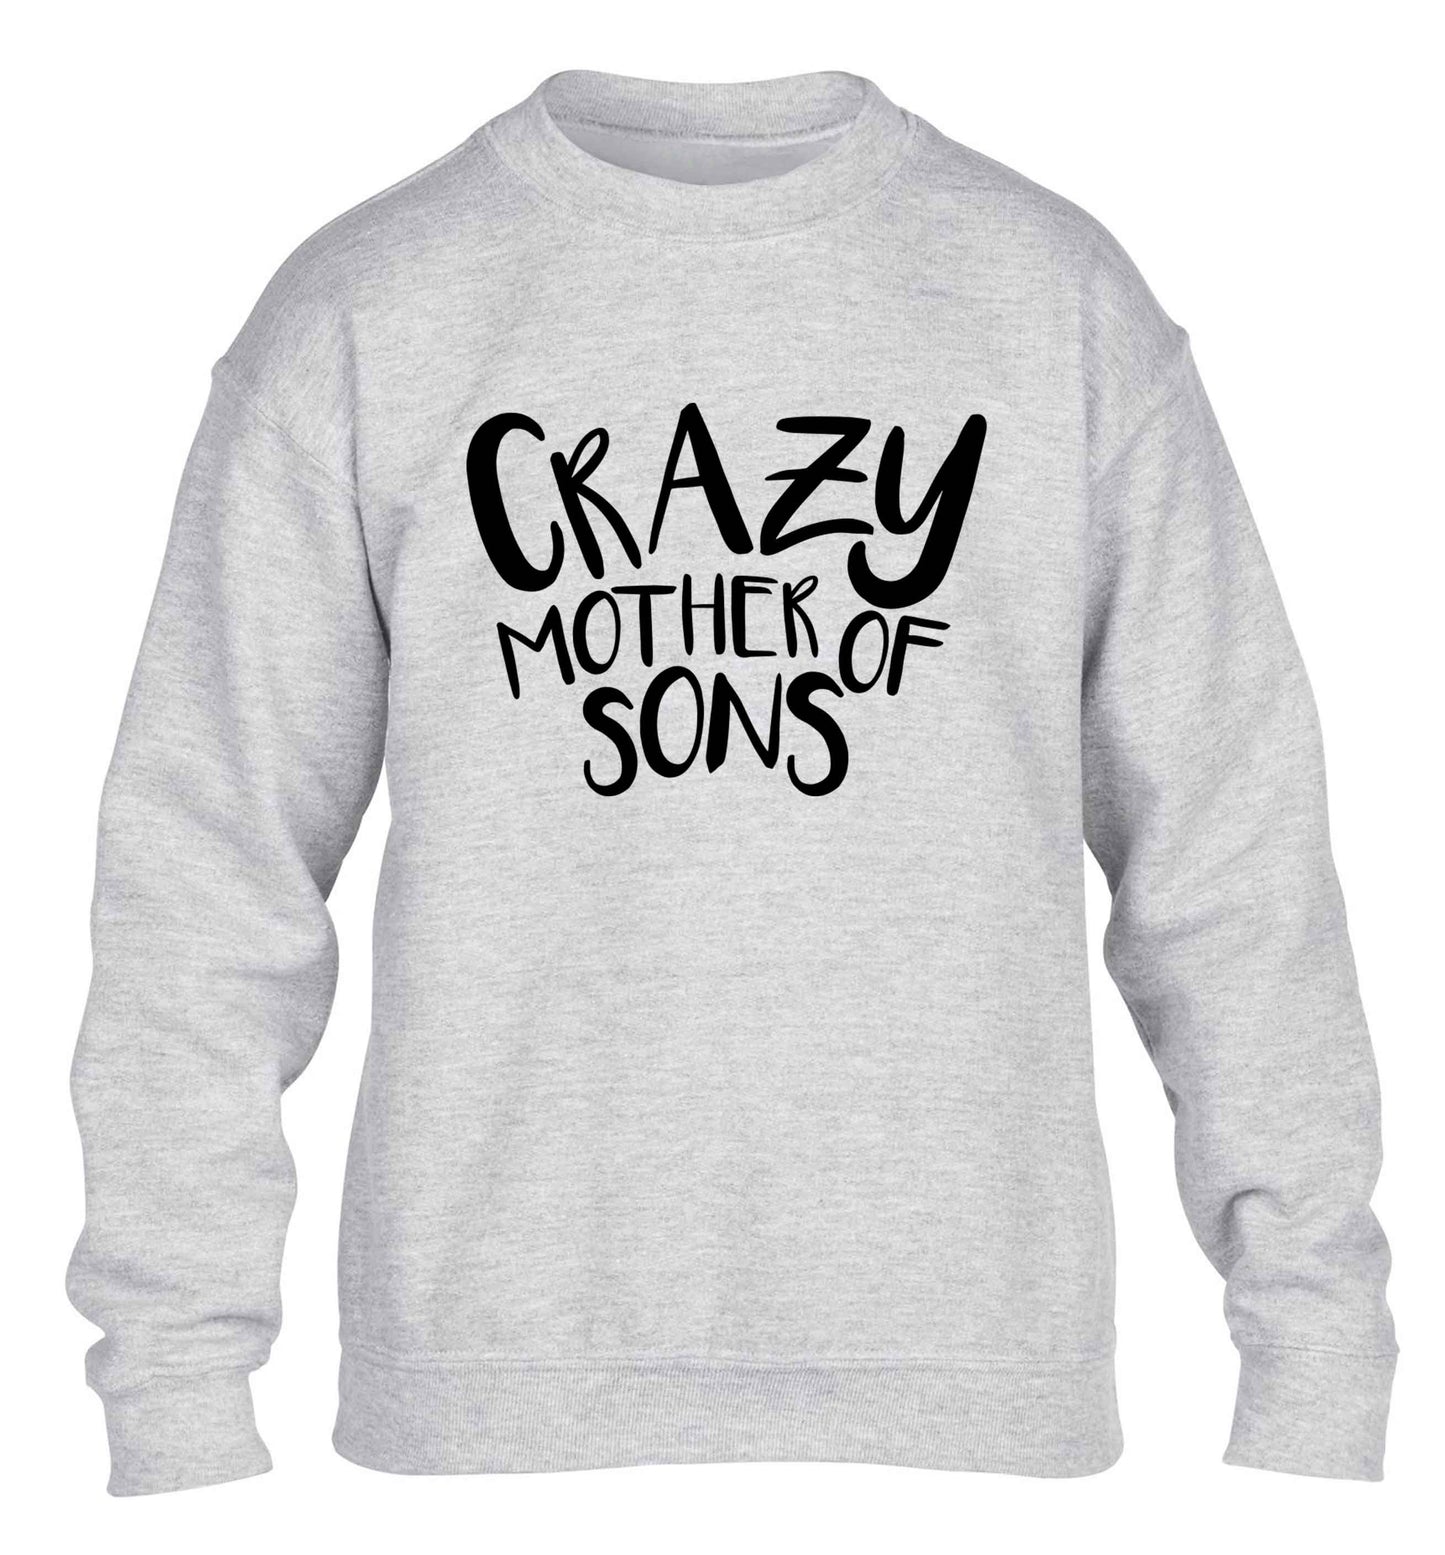 Crazy mother of sons children's grey sweater 12-13 Years